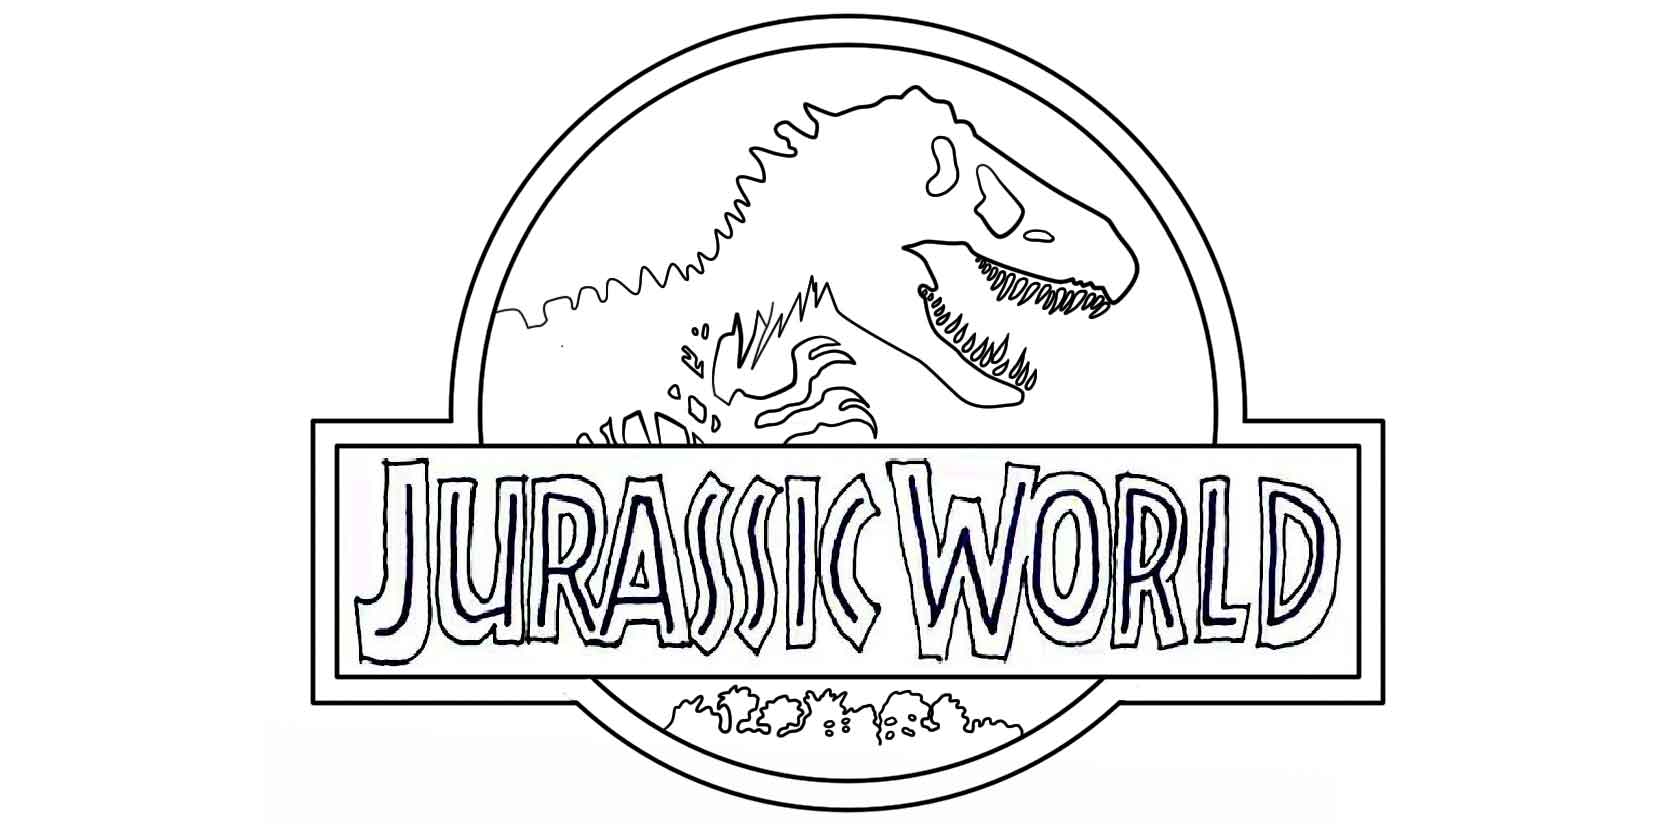 coloring pages jurassic world